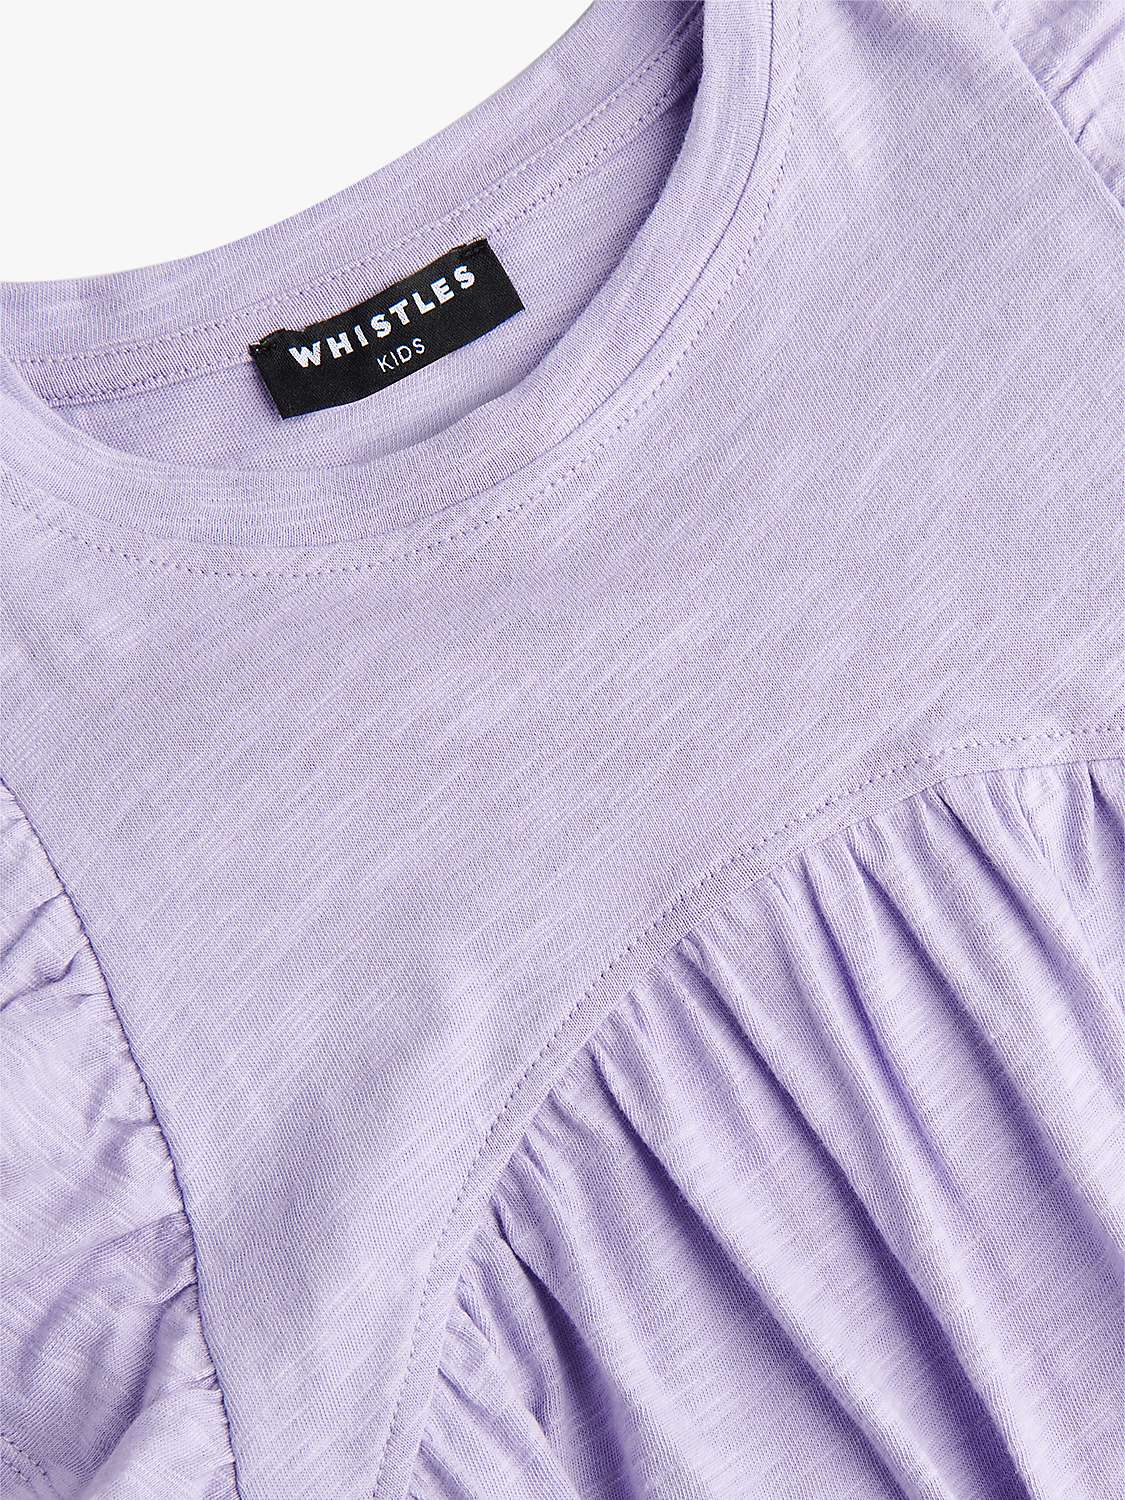 Buy Whistles Piper Jersey Dress, Lilac Online at johnlewis.com